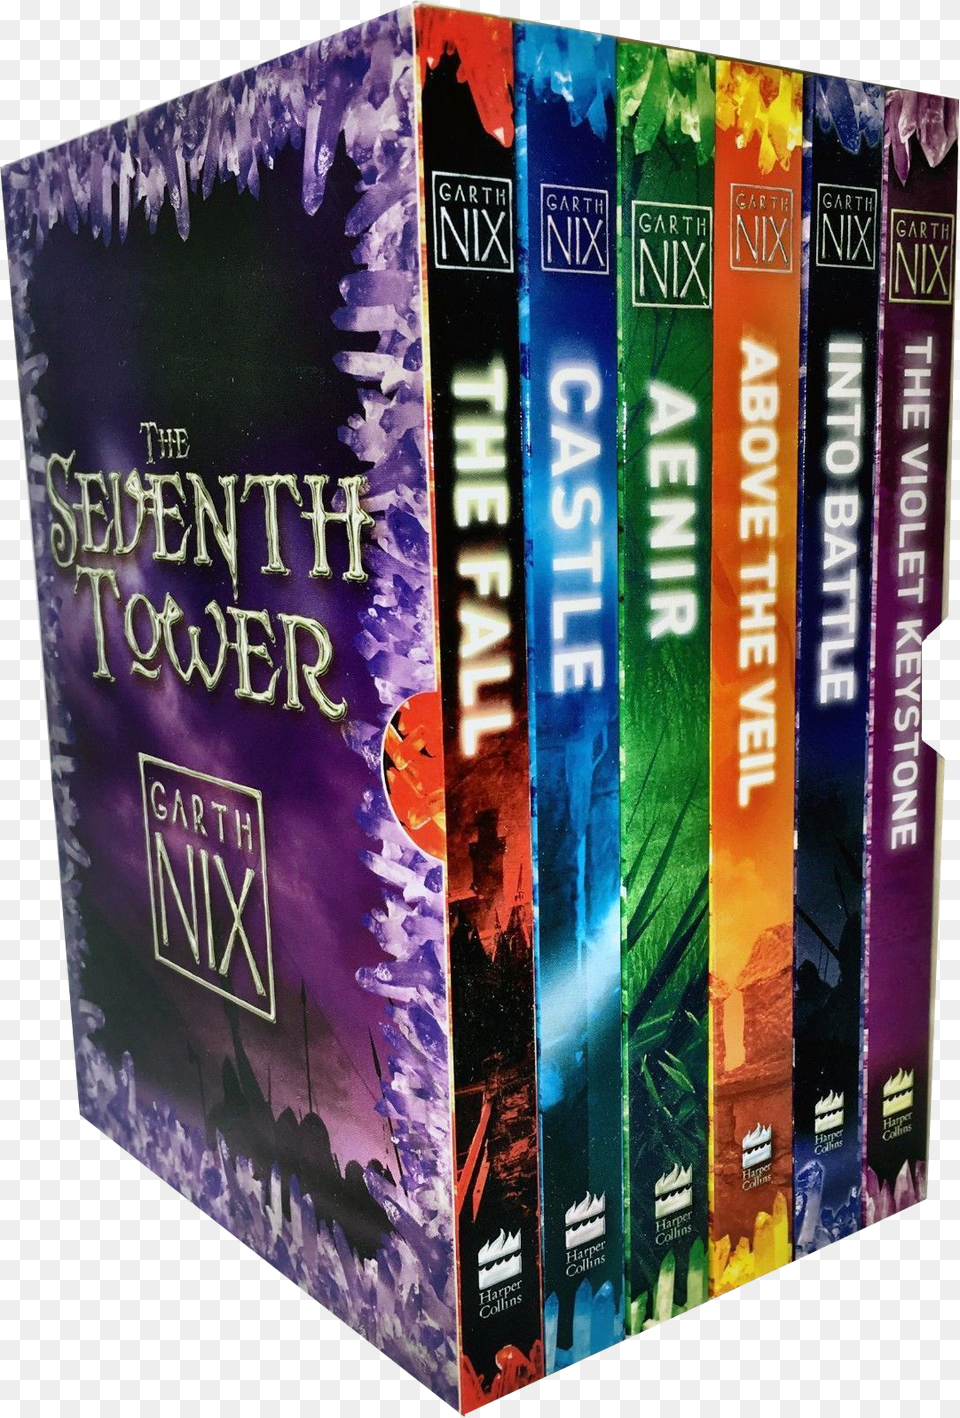 Garth Nix The Seventh Tower Collection 6 Books Box, Book, Publication, Novel Png Image